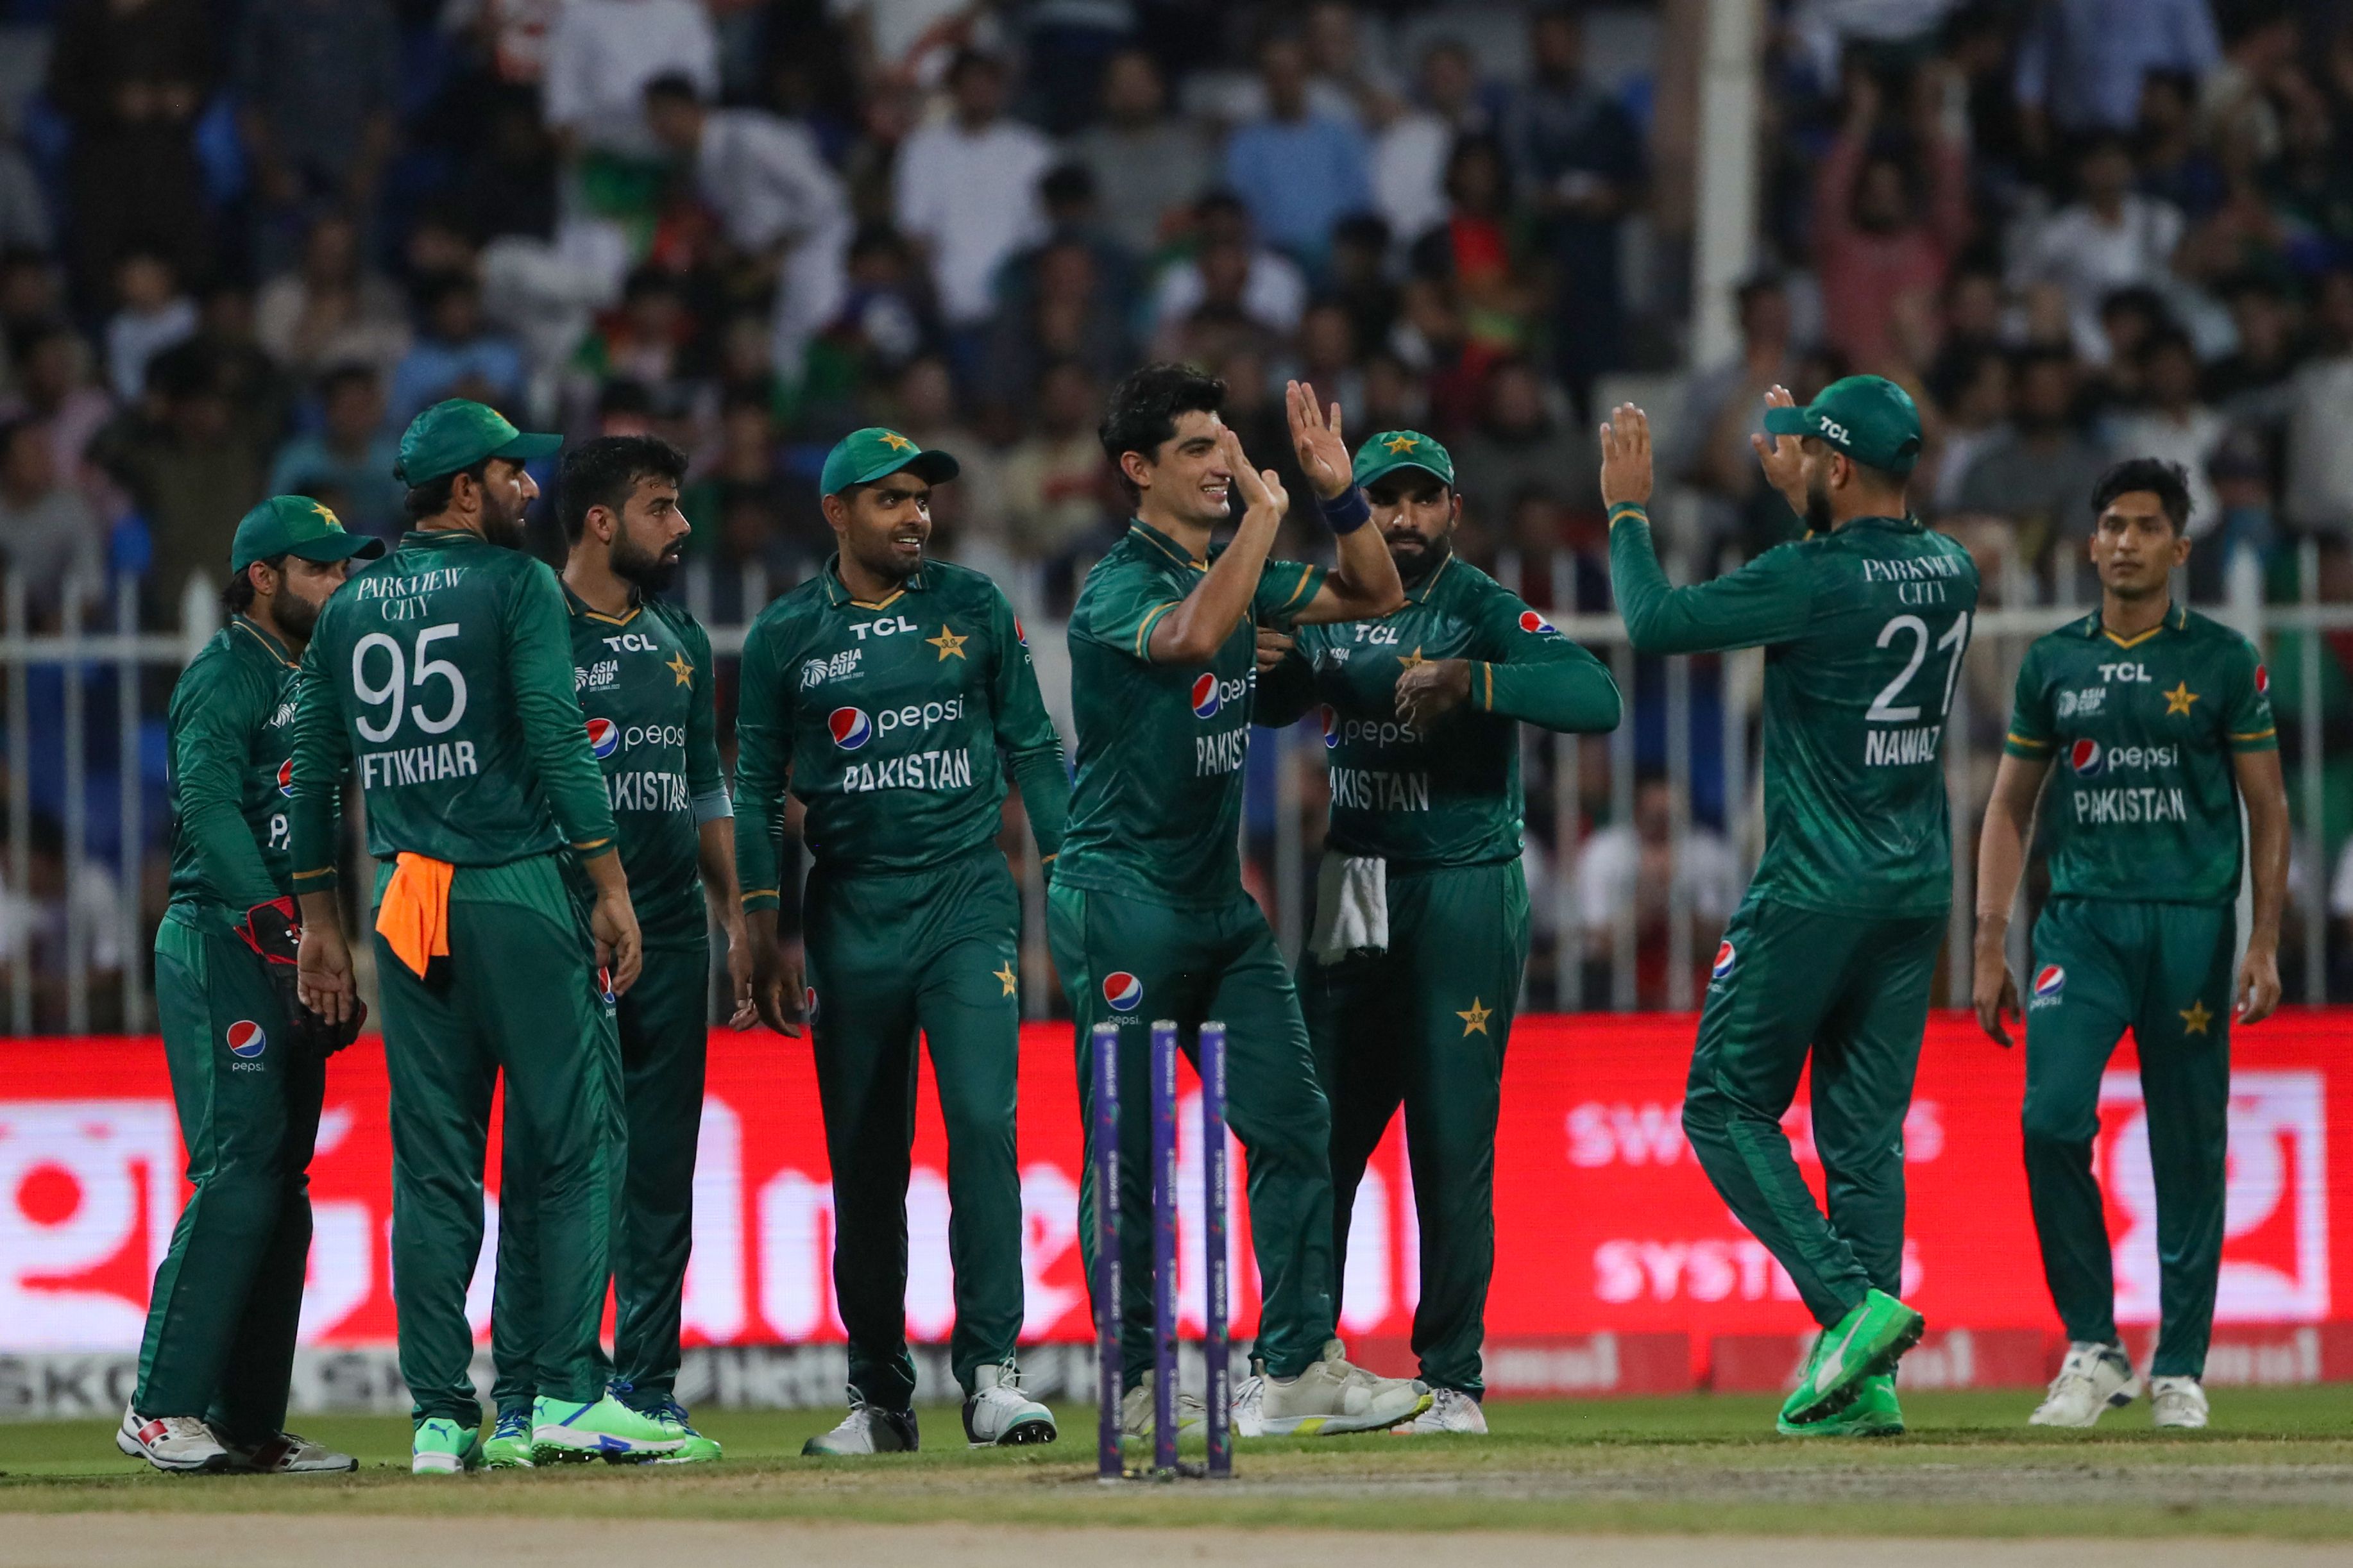 Asia Cup 2022 | Pakistan are favourites but Sri Lanka cannot be taken easy, comments Wasim Akram